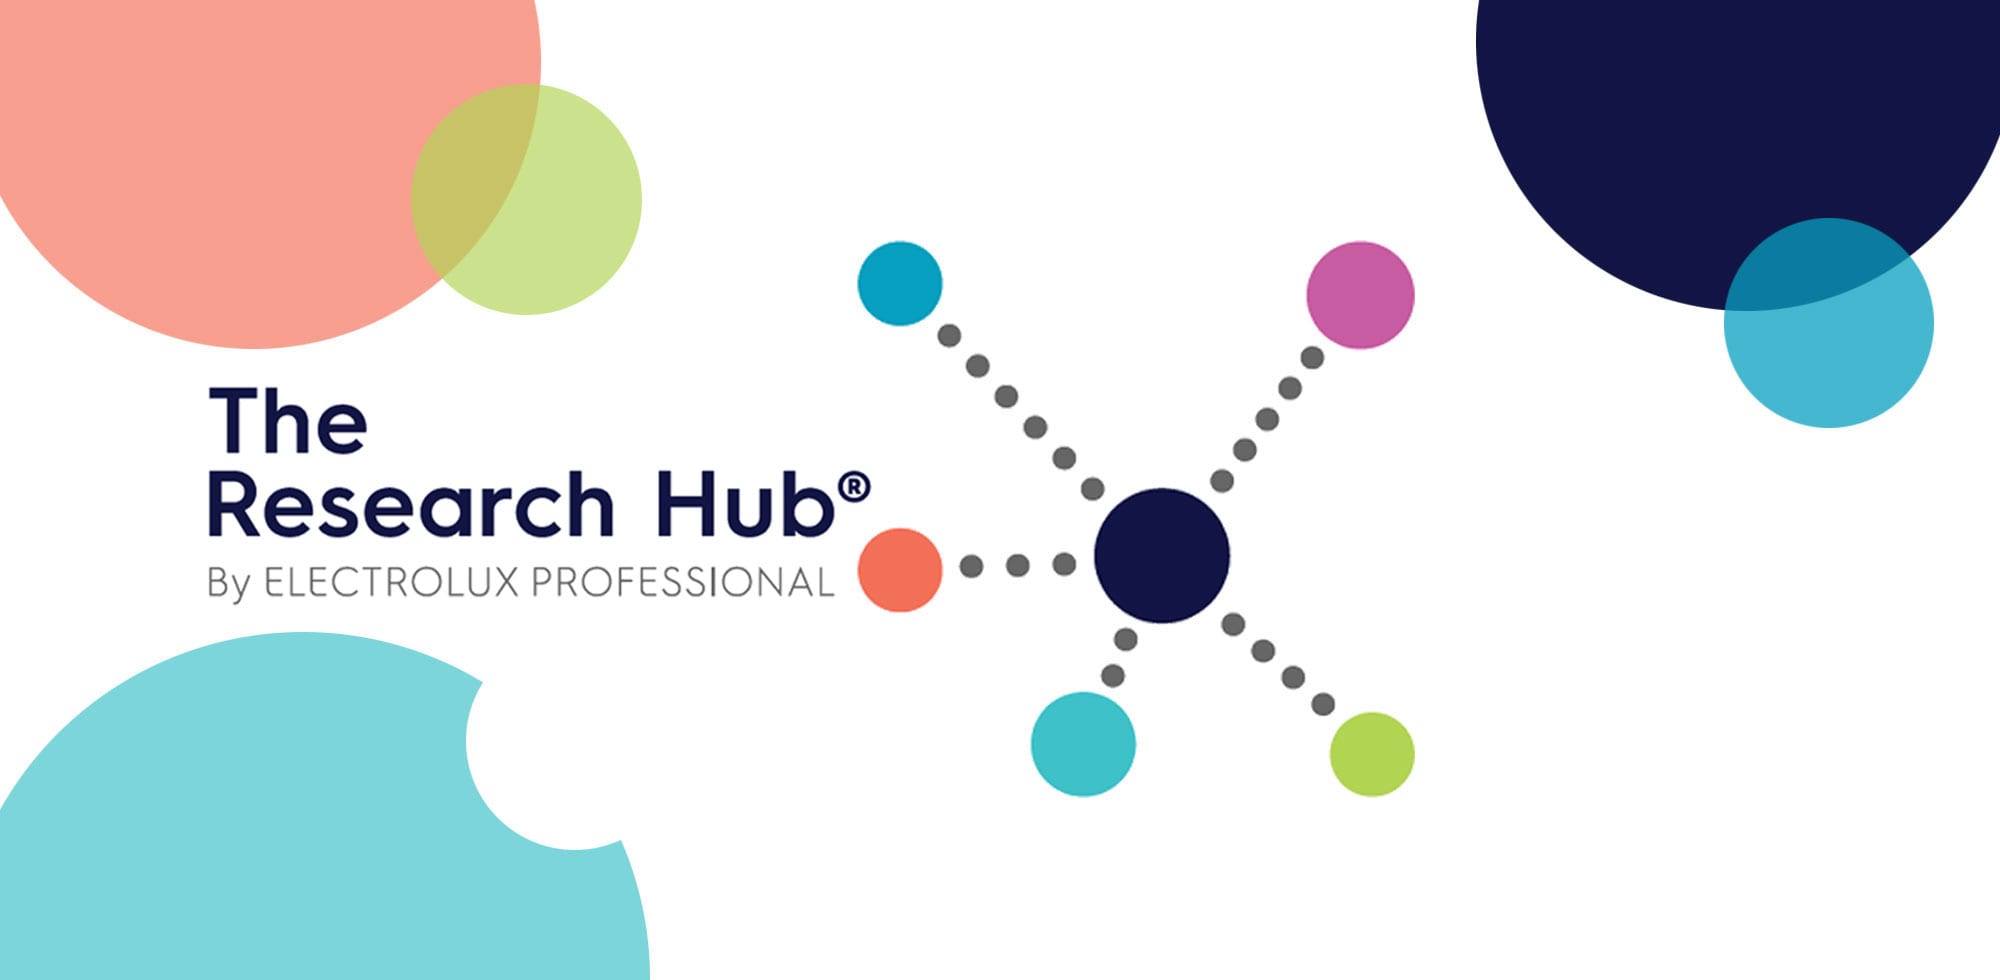 a research hub meaning